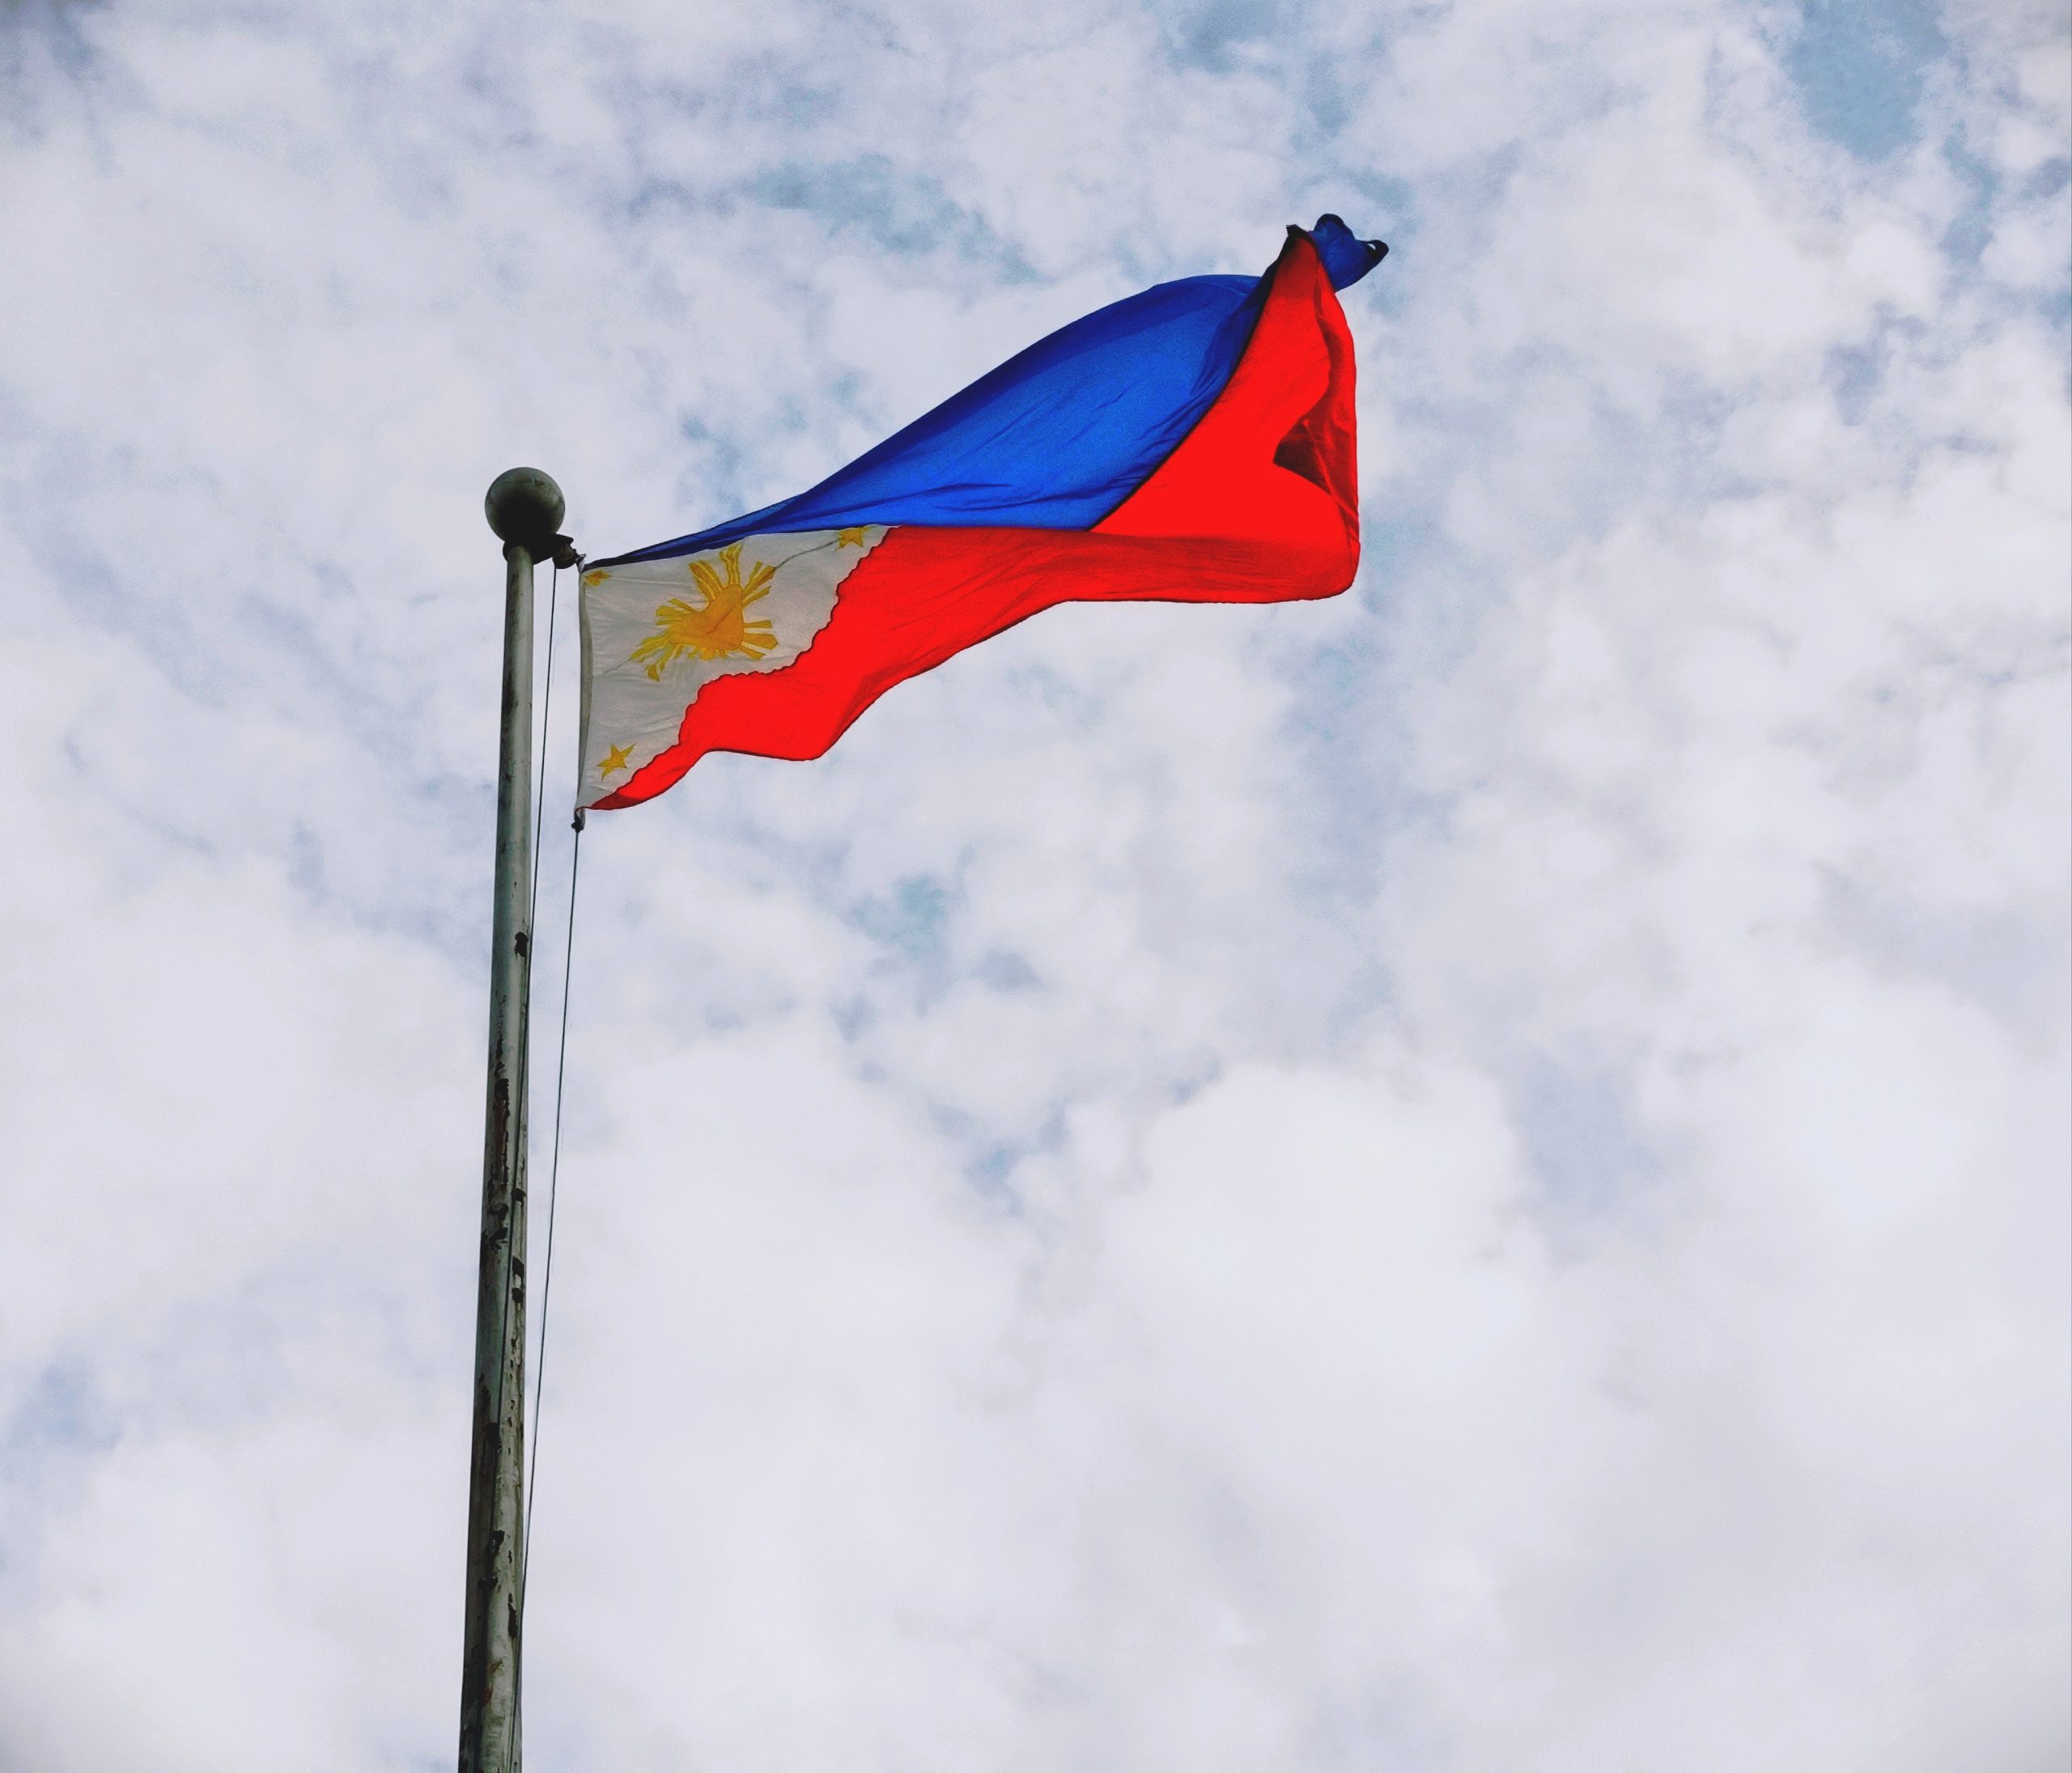 Philippine Flag Swaying by the Wind Under White Sky